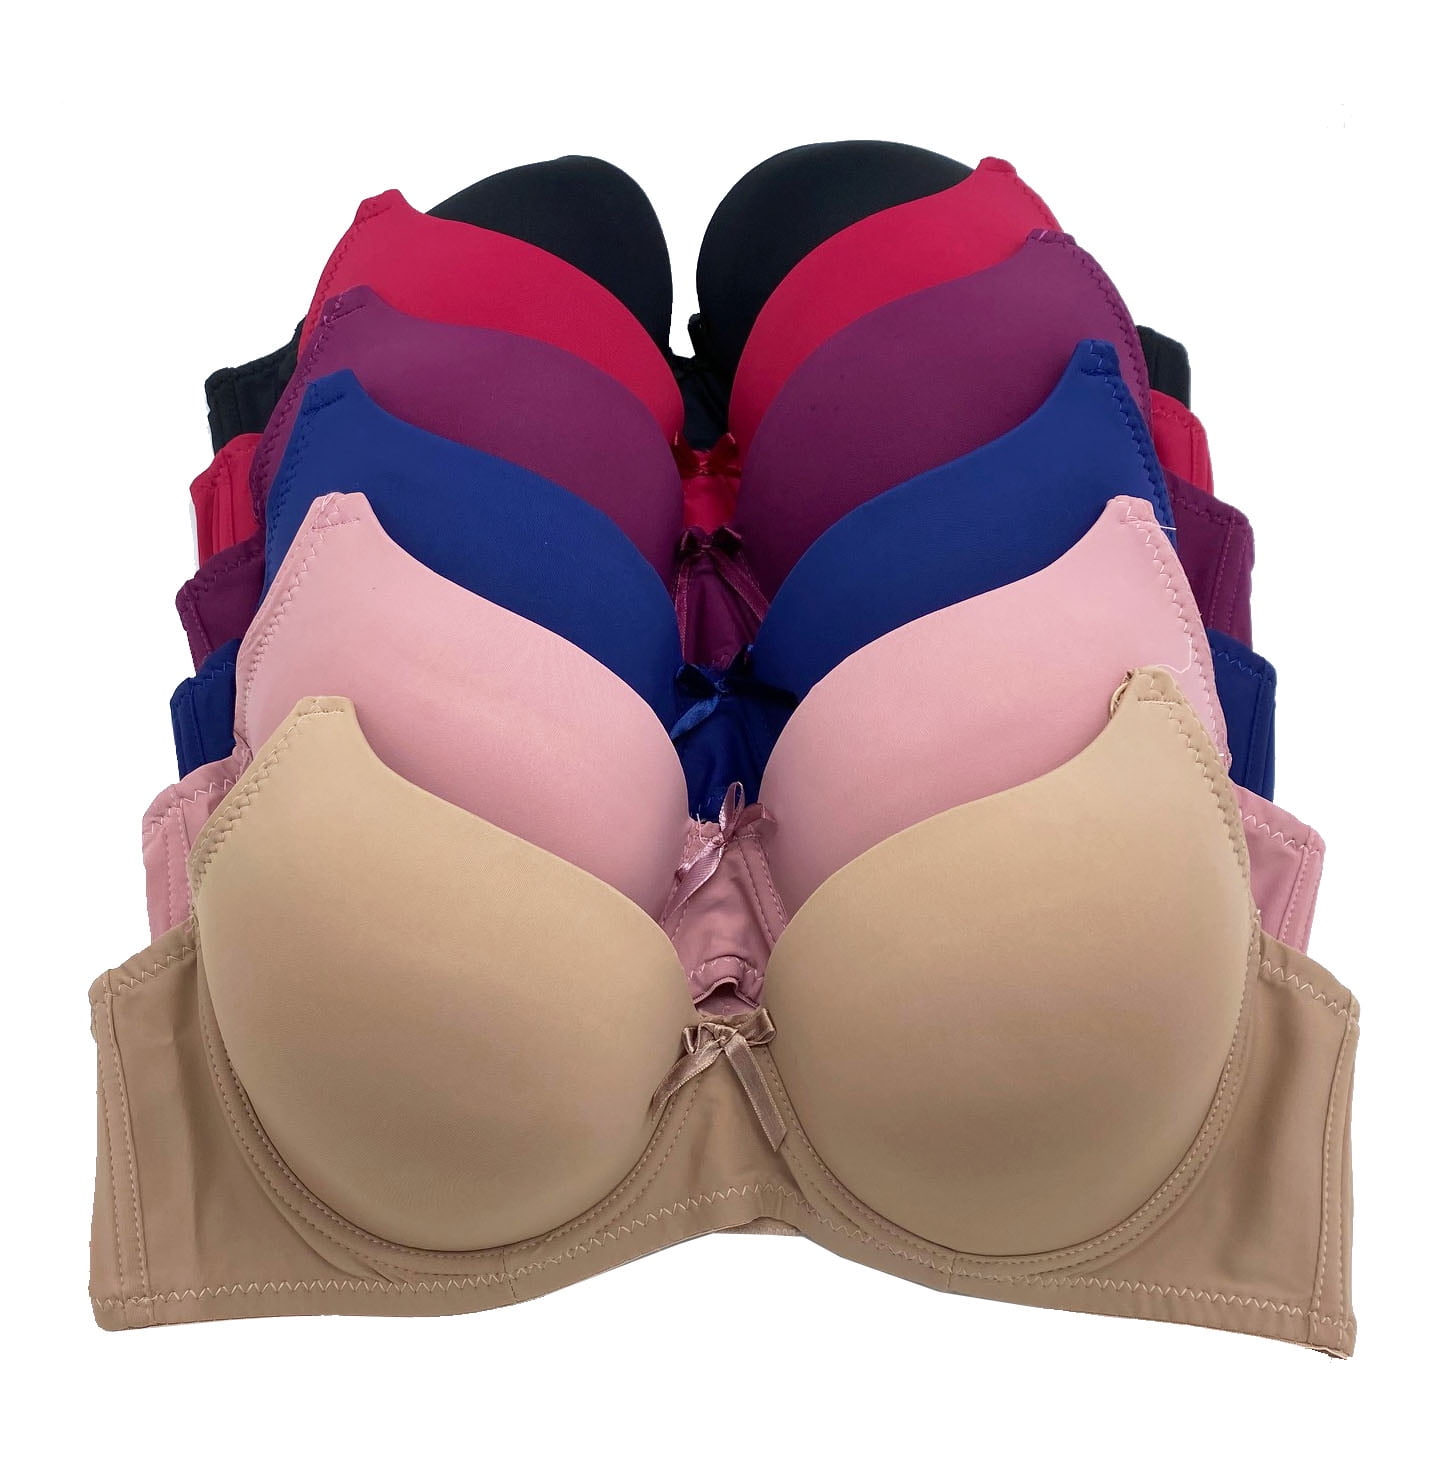 Lot 3/6 Push up Bras Thick Padding Power Max Lift Add 2 Cup 3